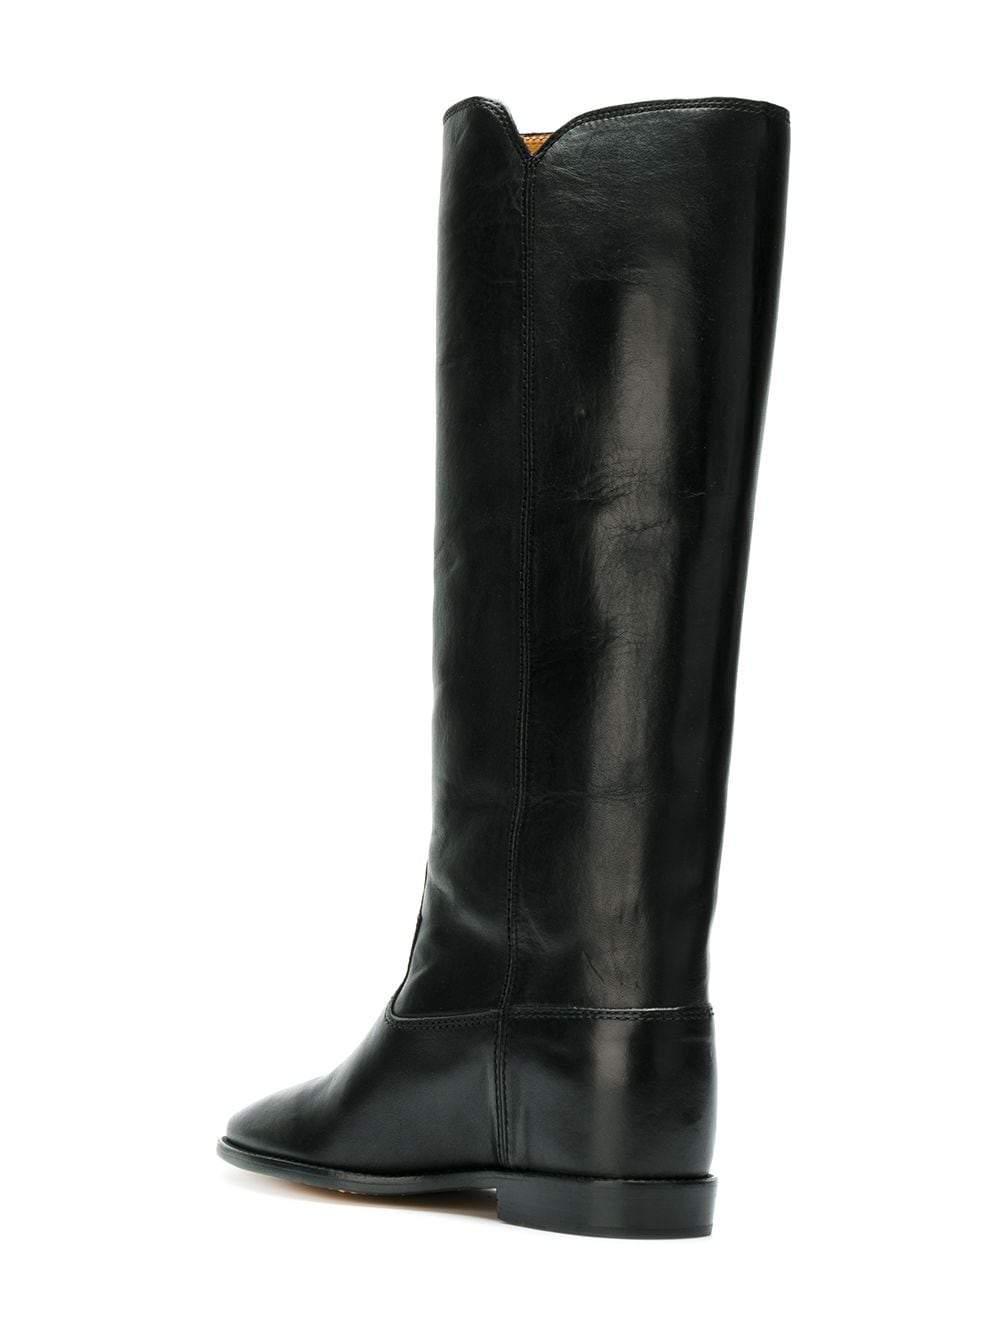 Bogholder Surichinmoi lette Isabel Marant Chess Leather Boots in Black - Save 67% - Lyst